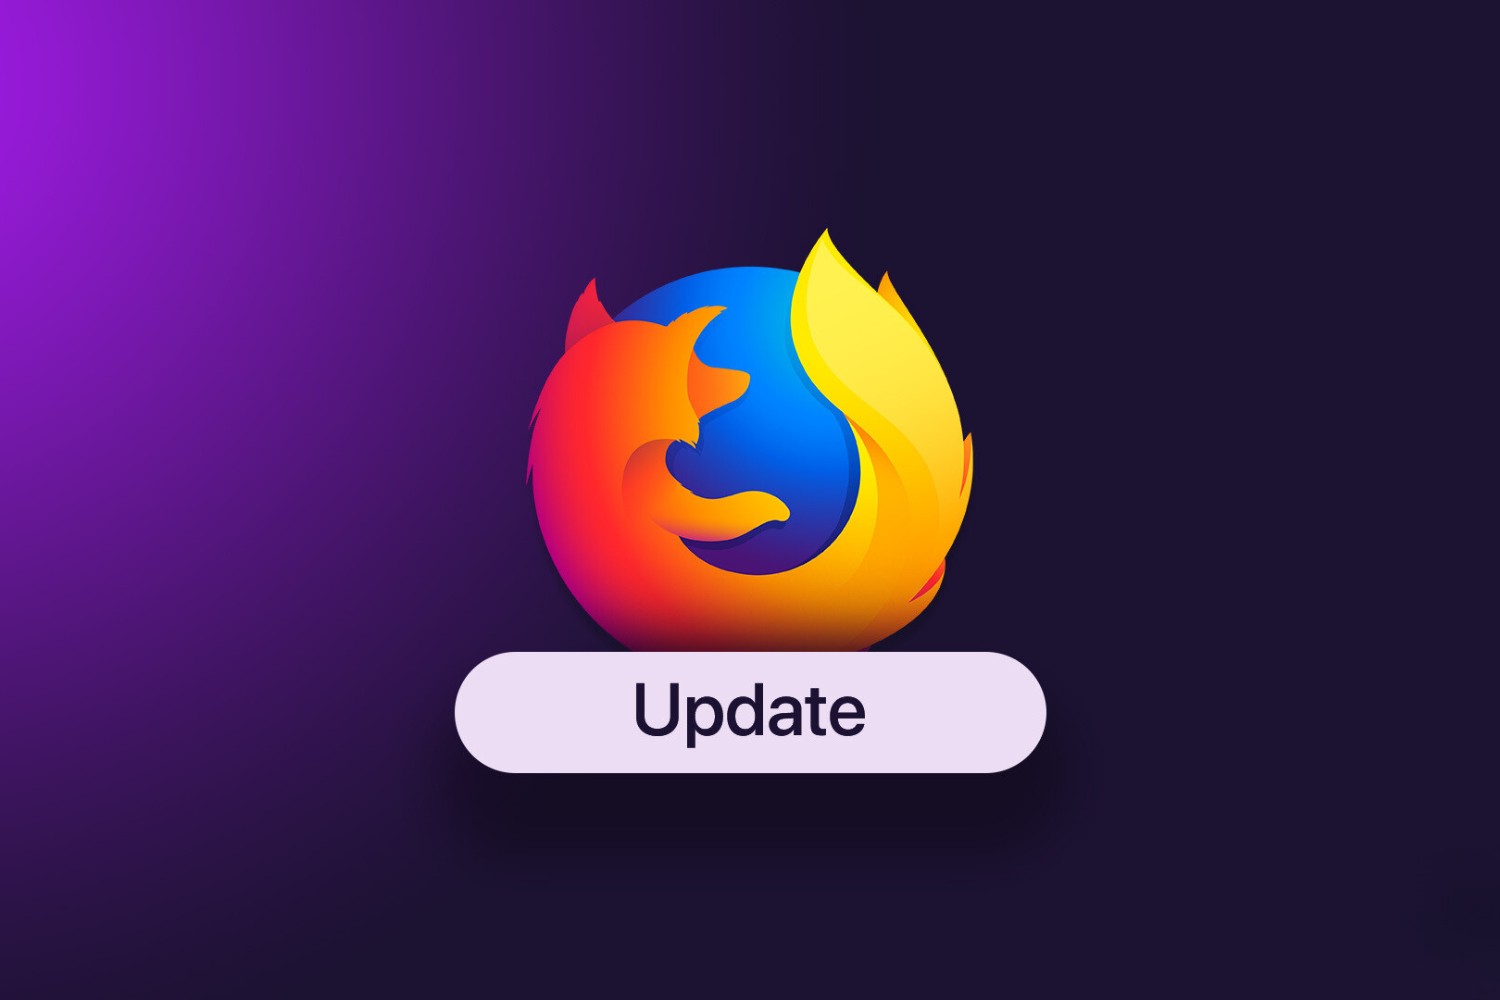 How To Manually Check For Firefox Updates